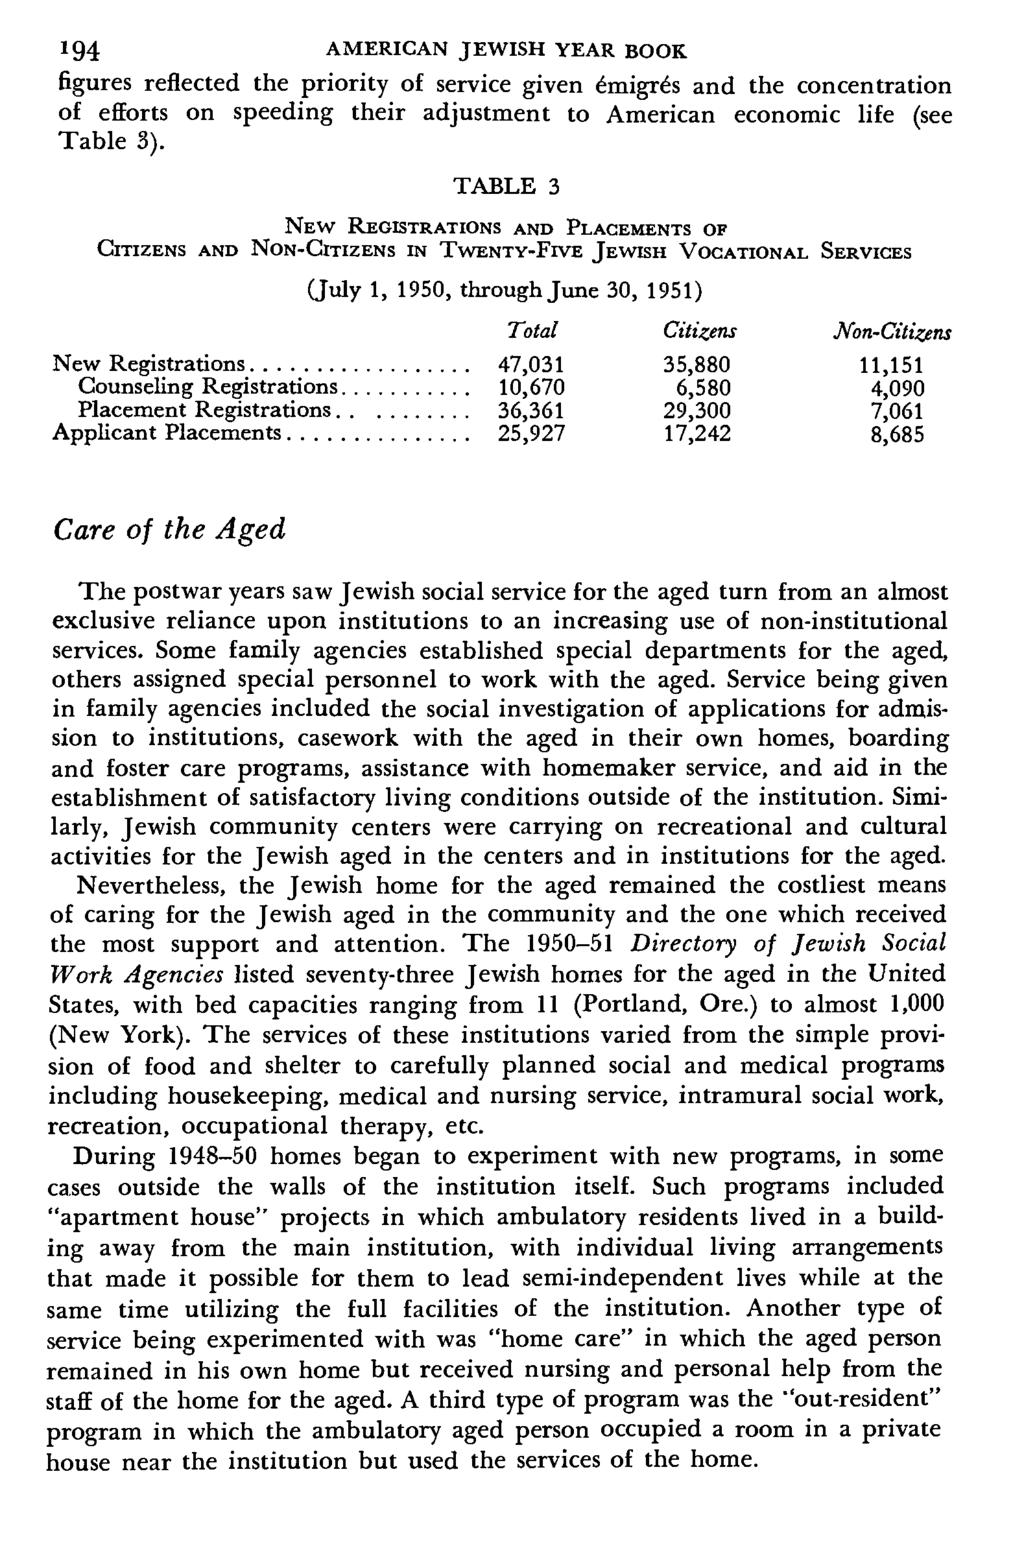 194 AMERICAN JEWISH YEAR BOOK figures reflected the priority of service given emigres and the concentration of efforts on speeding their adjustment to American economic life (see Table 3).